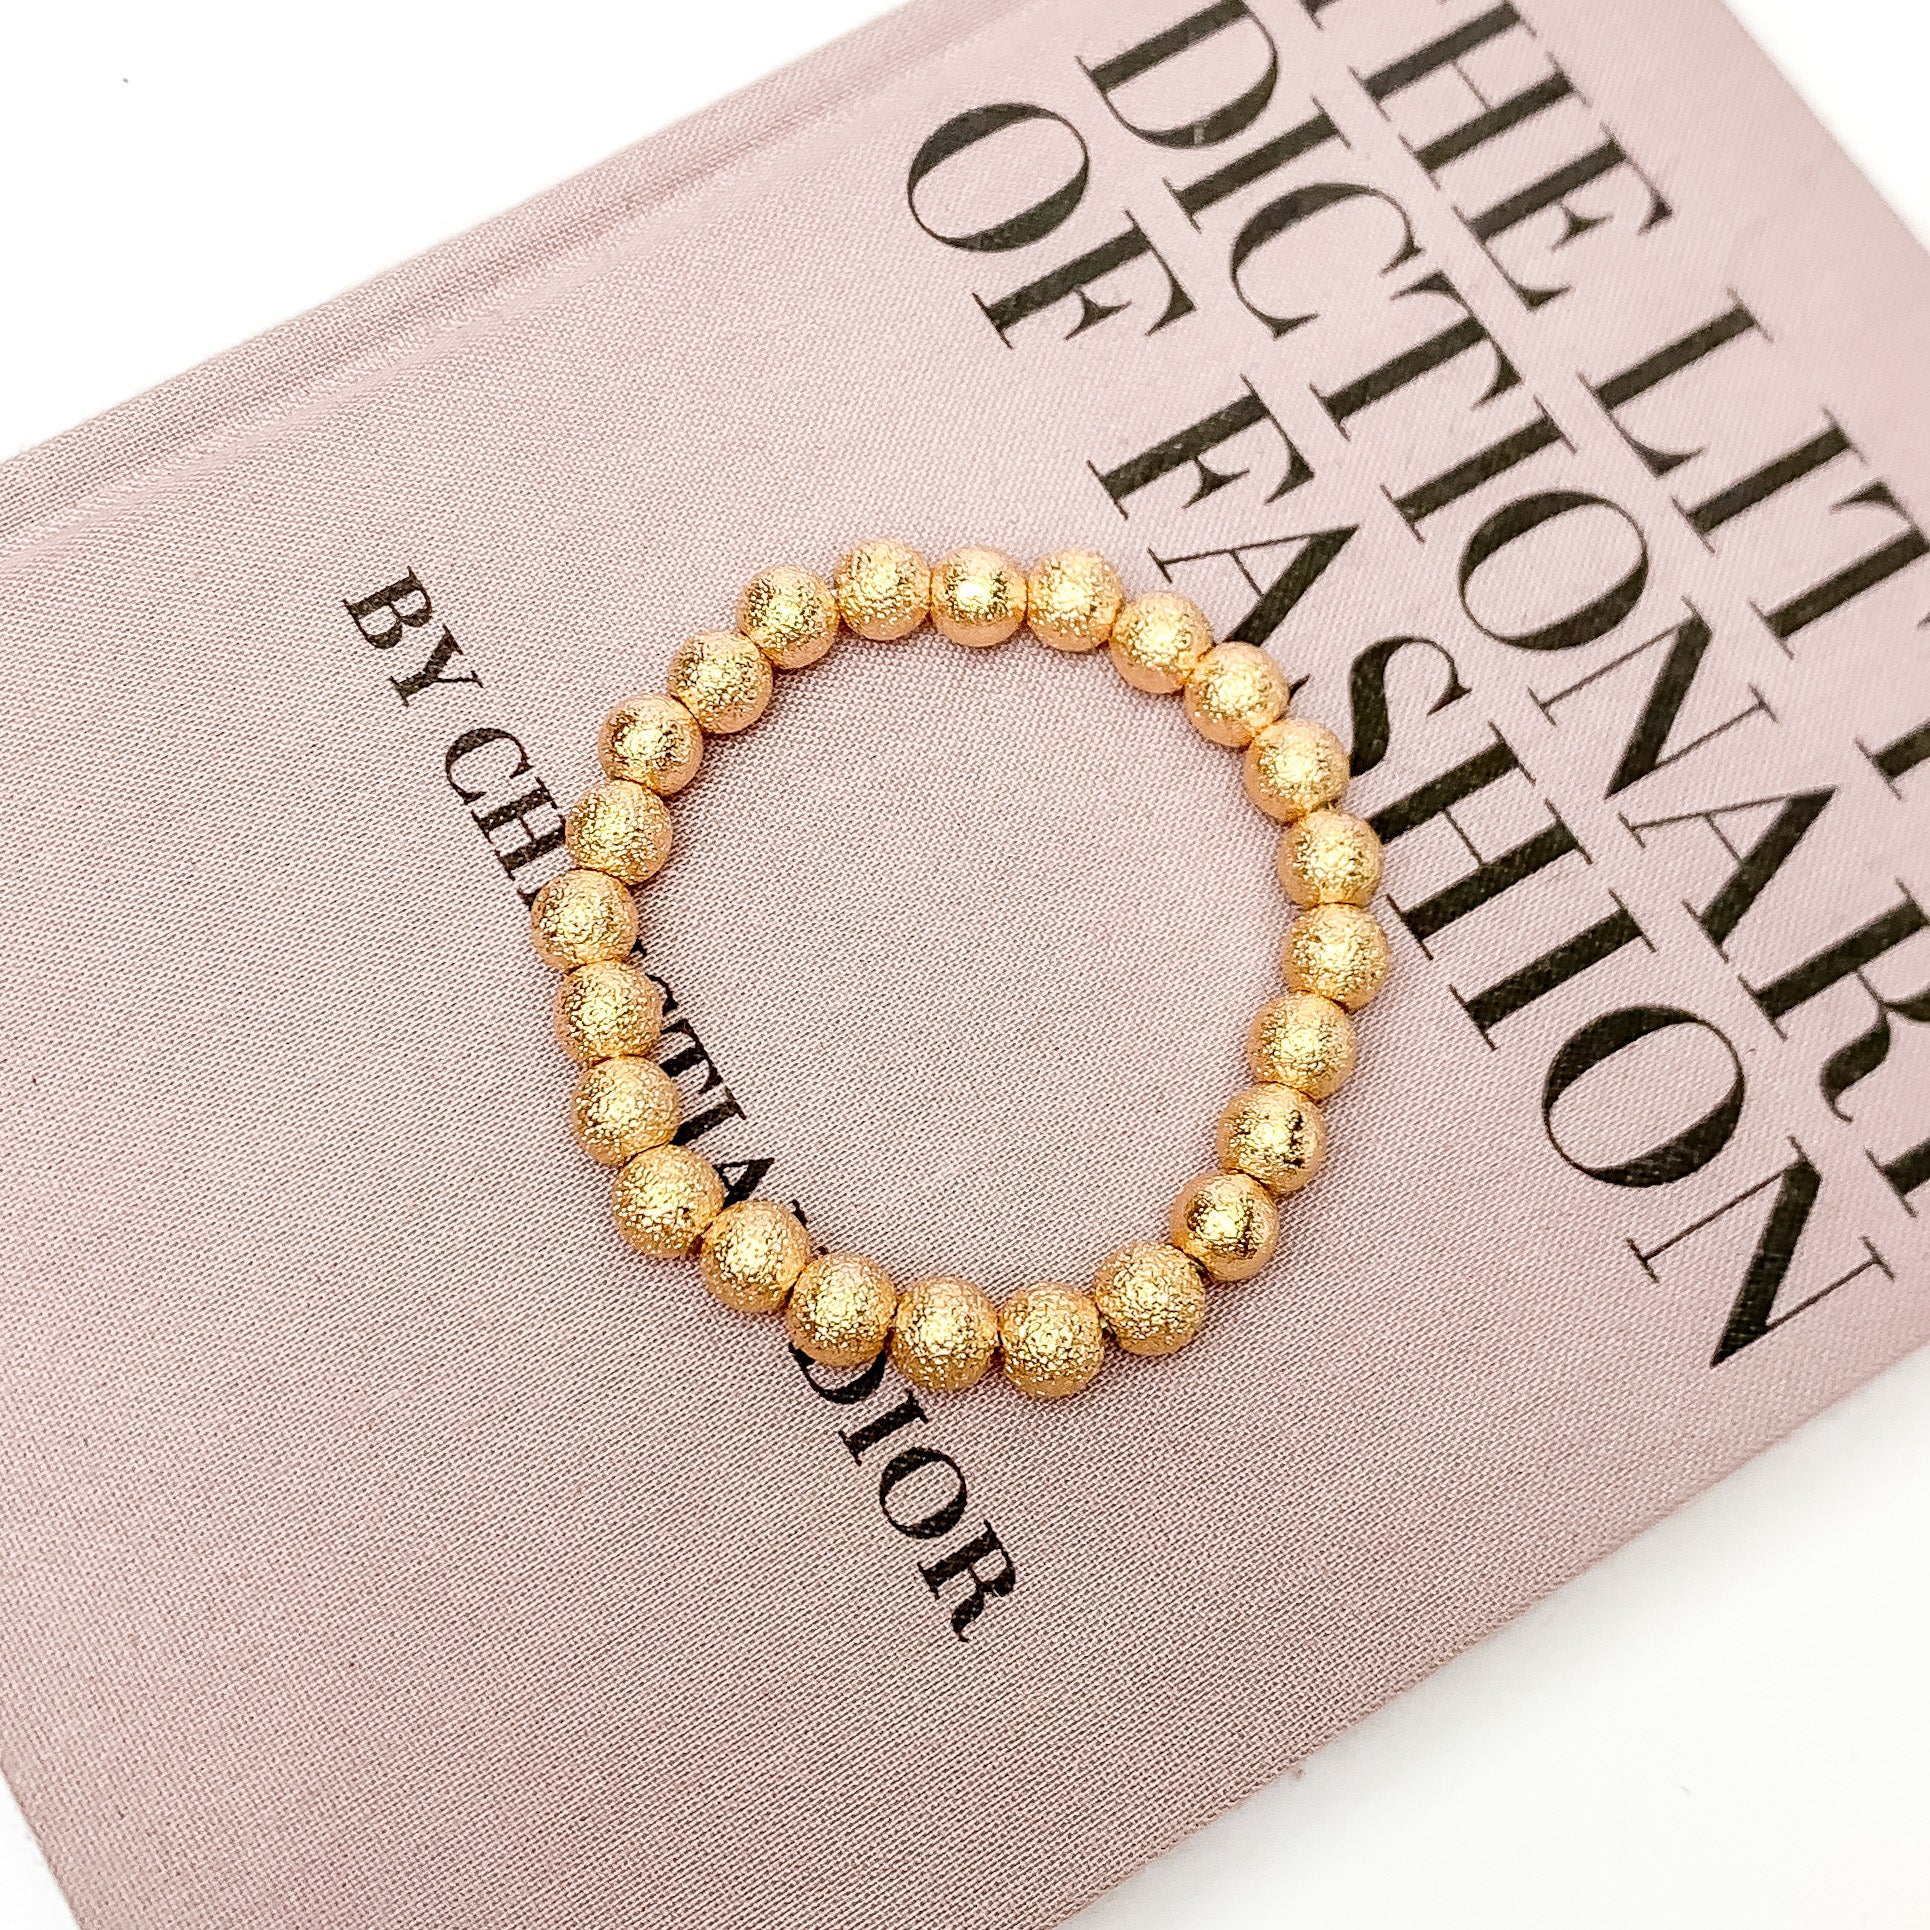 Gold Tone Basic Beaded Bracelet. Pictured laying on a book. The book is on a white background.